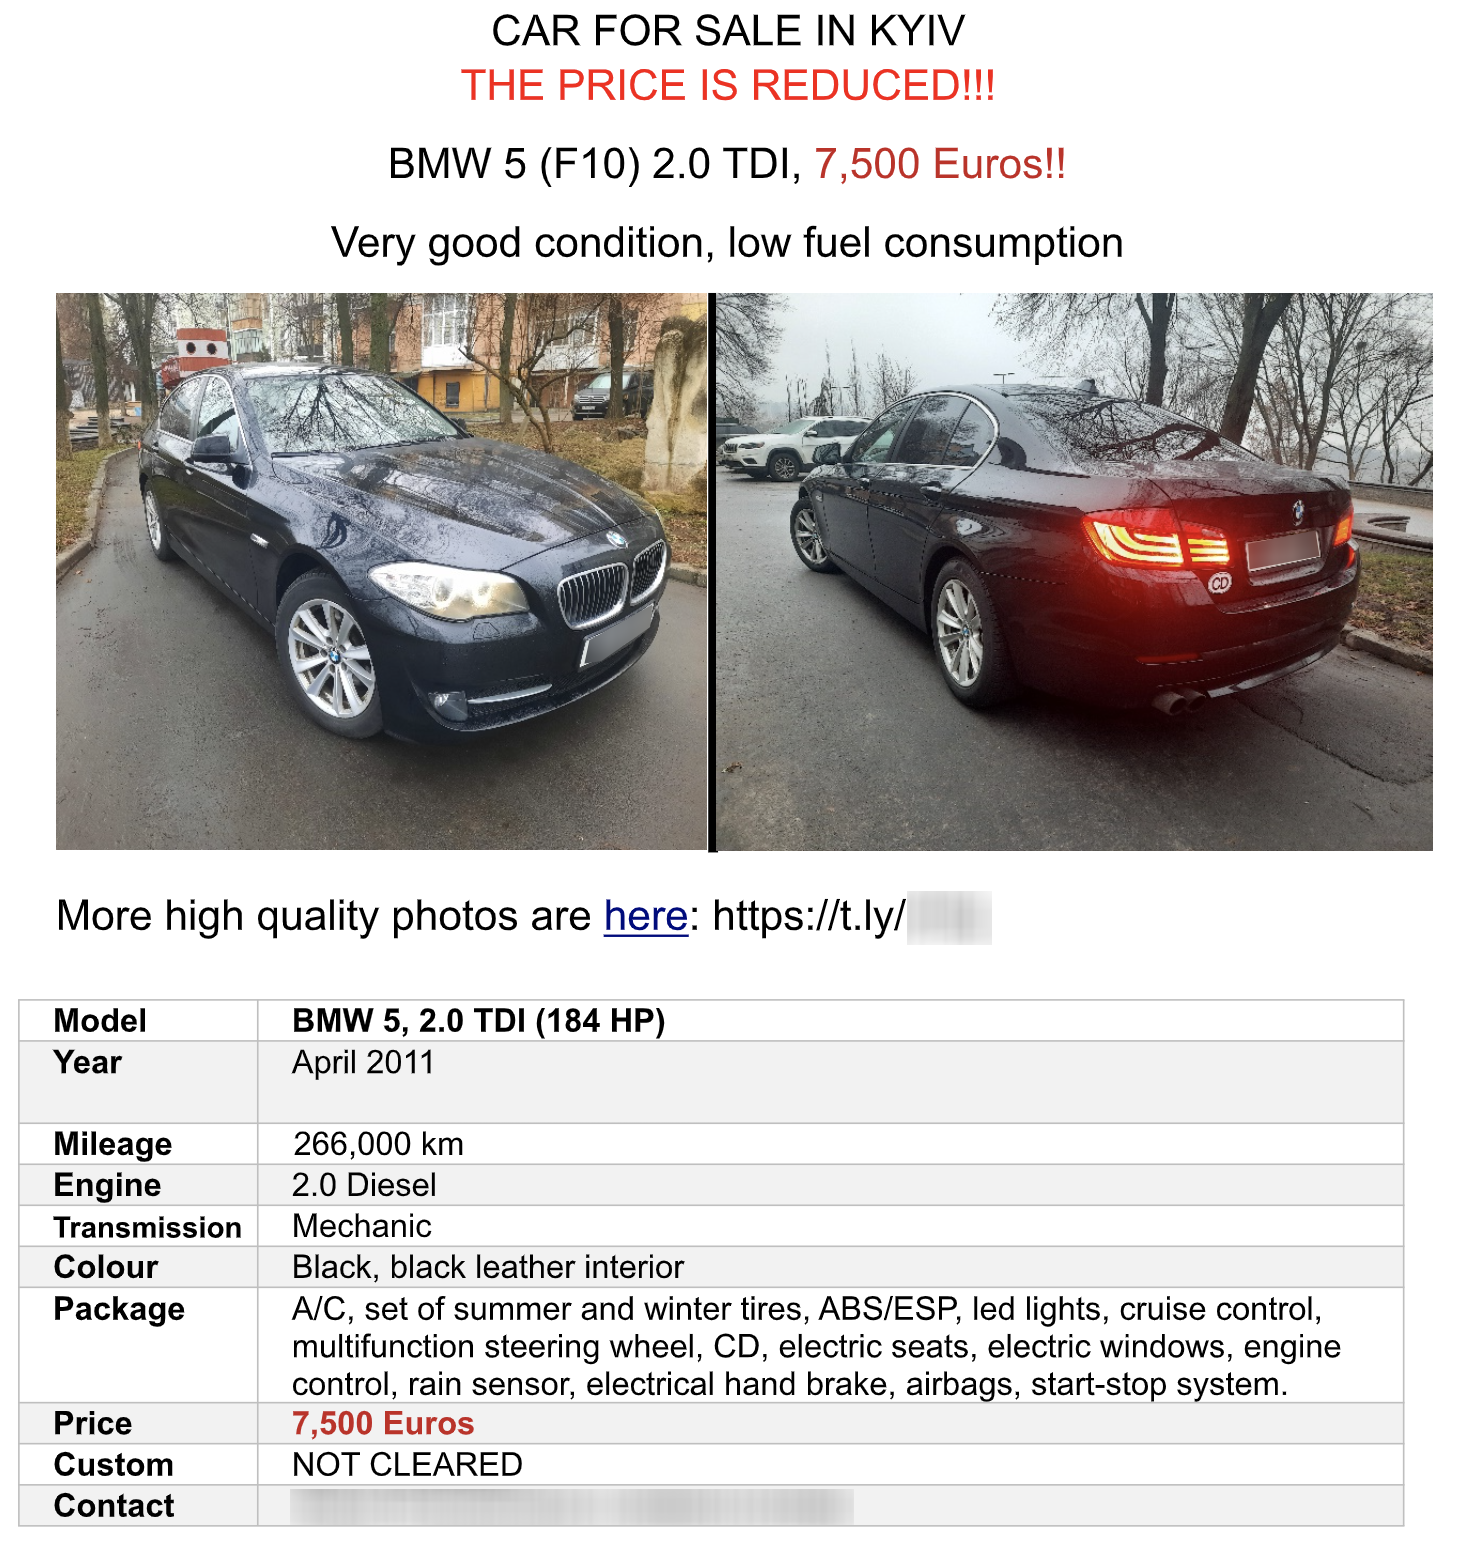 Image 1 is an emailed flyer advertising a car for sale. The heading text says “car for sale in Kyiv, the price is reduced!!!” “BMW 5 (F10) 2.0, TDI, 7,500 Euros!! Very good condition, low fuel consumption.” There are two pictures of the car, of the back and the front. “More high-quality photos are here” includes an embedded link and a shortened link. The bottom of the flyer has a table with the stats of the car, including model, year, mileage, engine, transmission, color, package, price, custom, and contact information, which has a name and a phone number. The contact information and license plates are redacted.